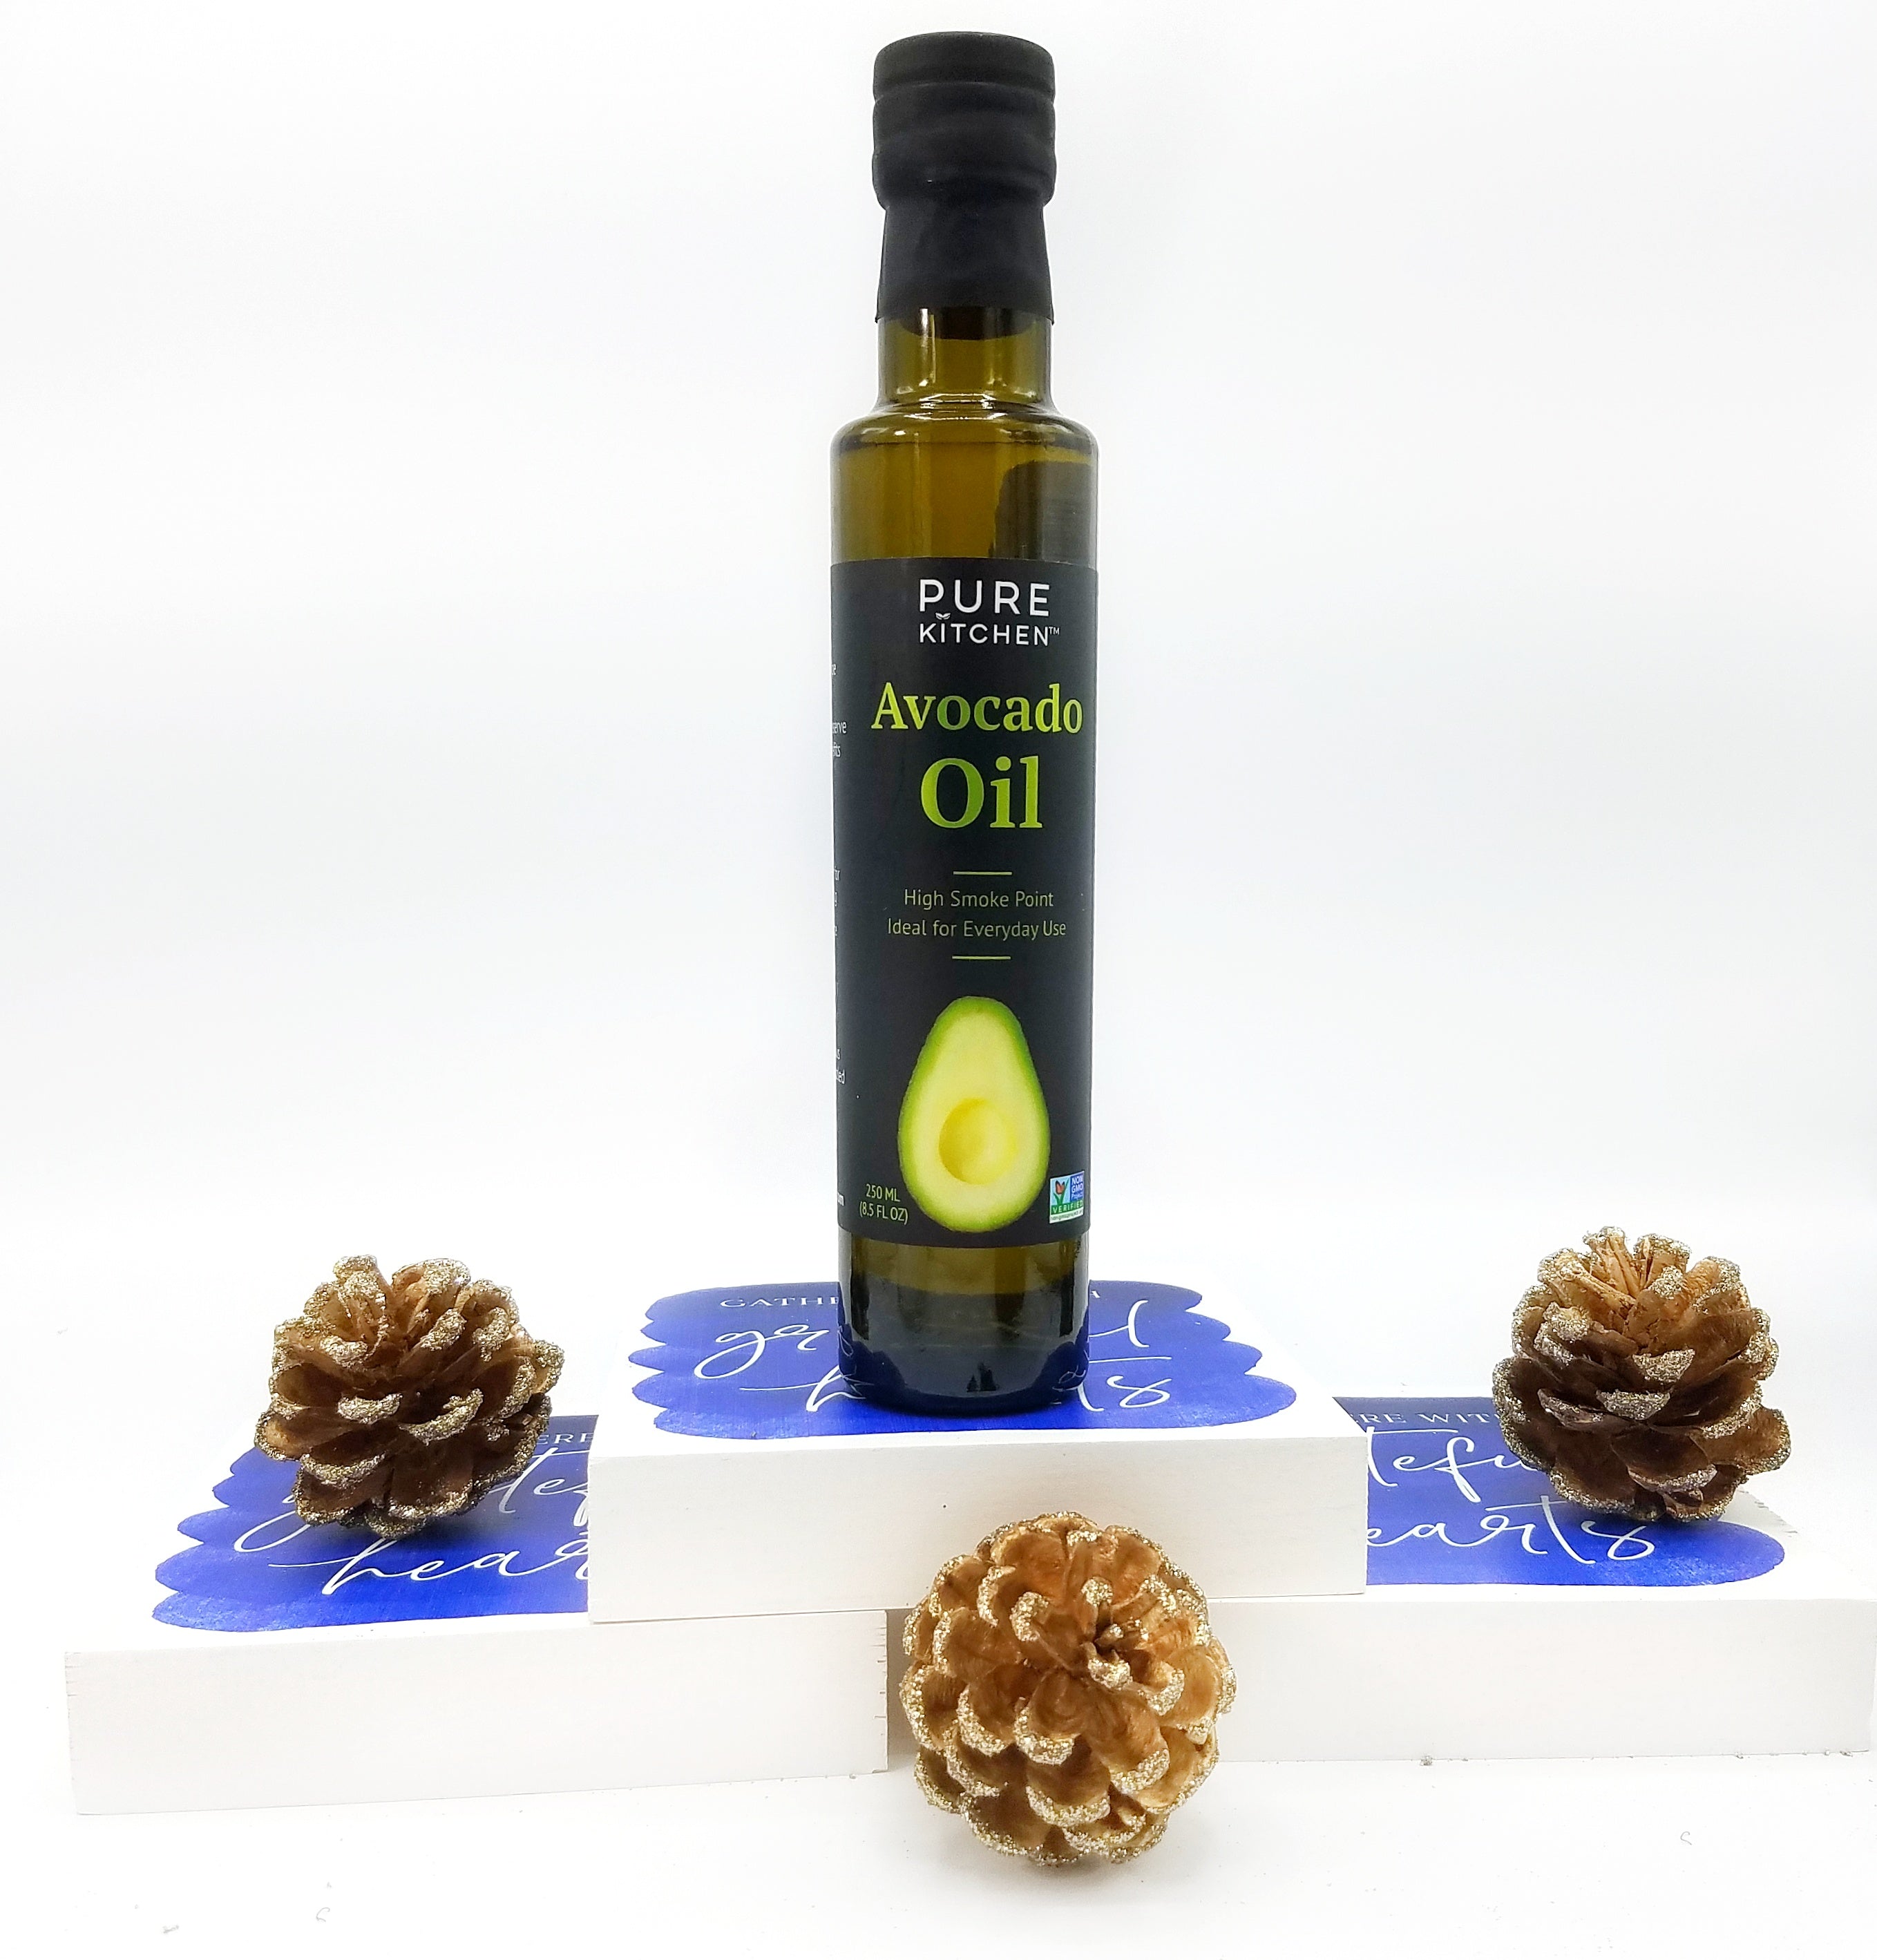 Extra Virgin Olive Oil infused with Basil - Sonoma Pantry - 250ml